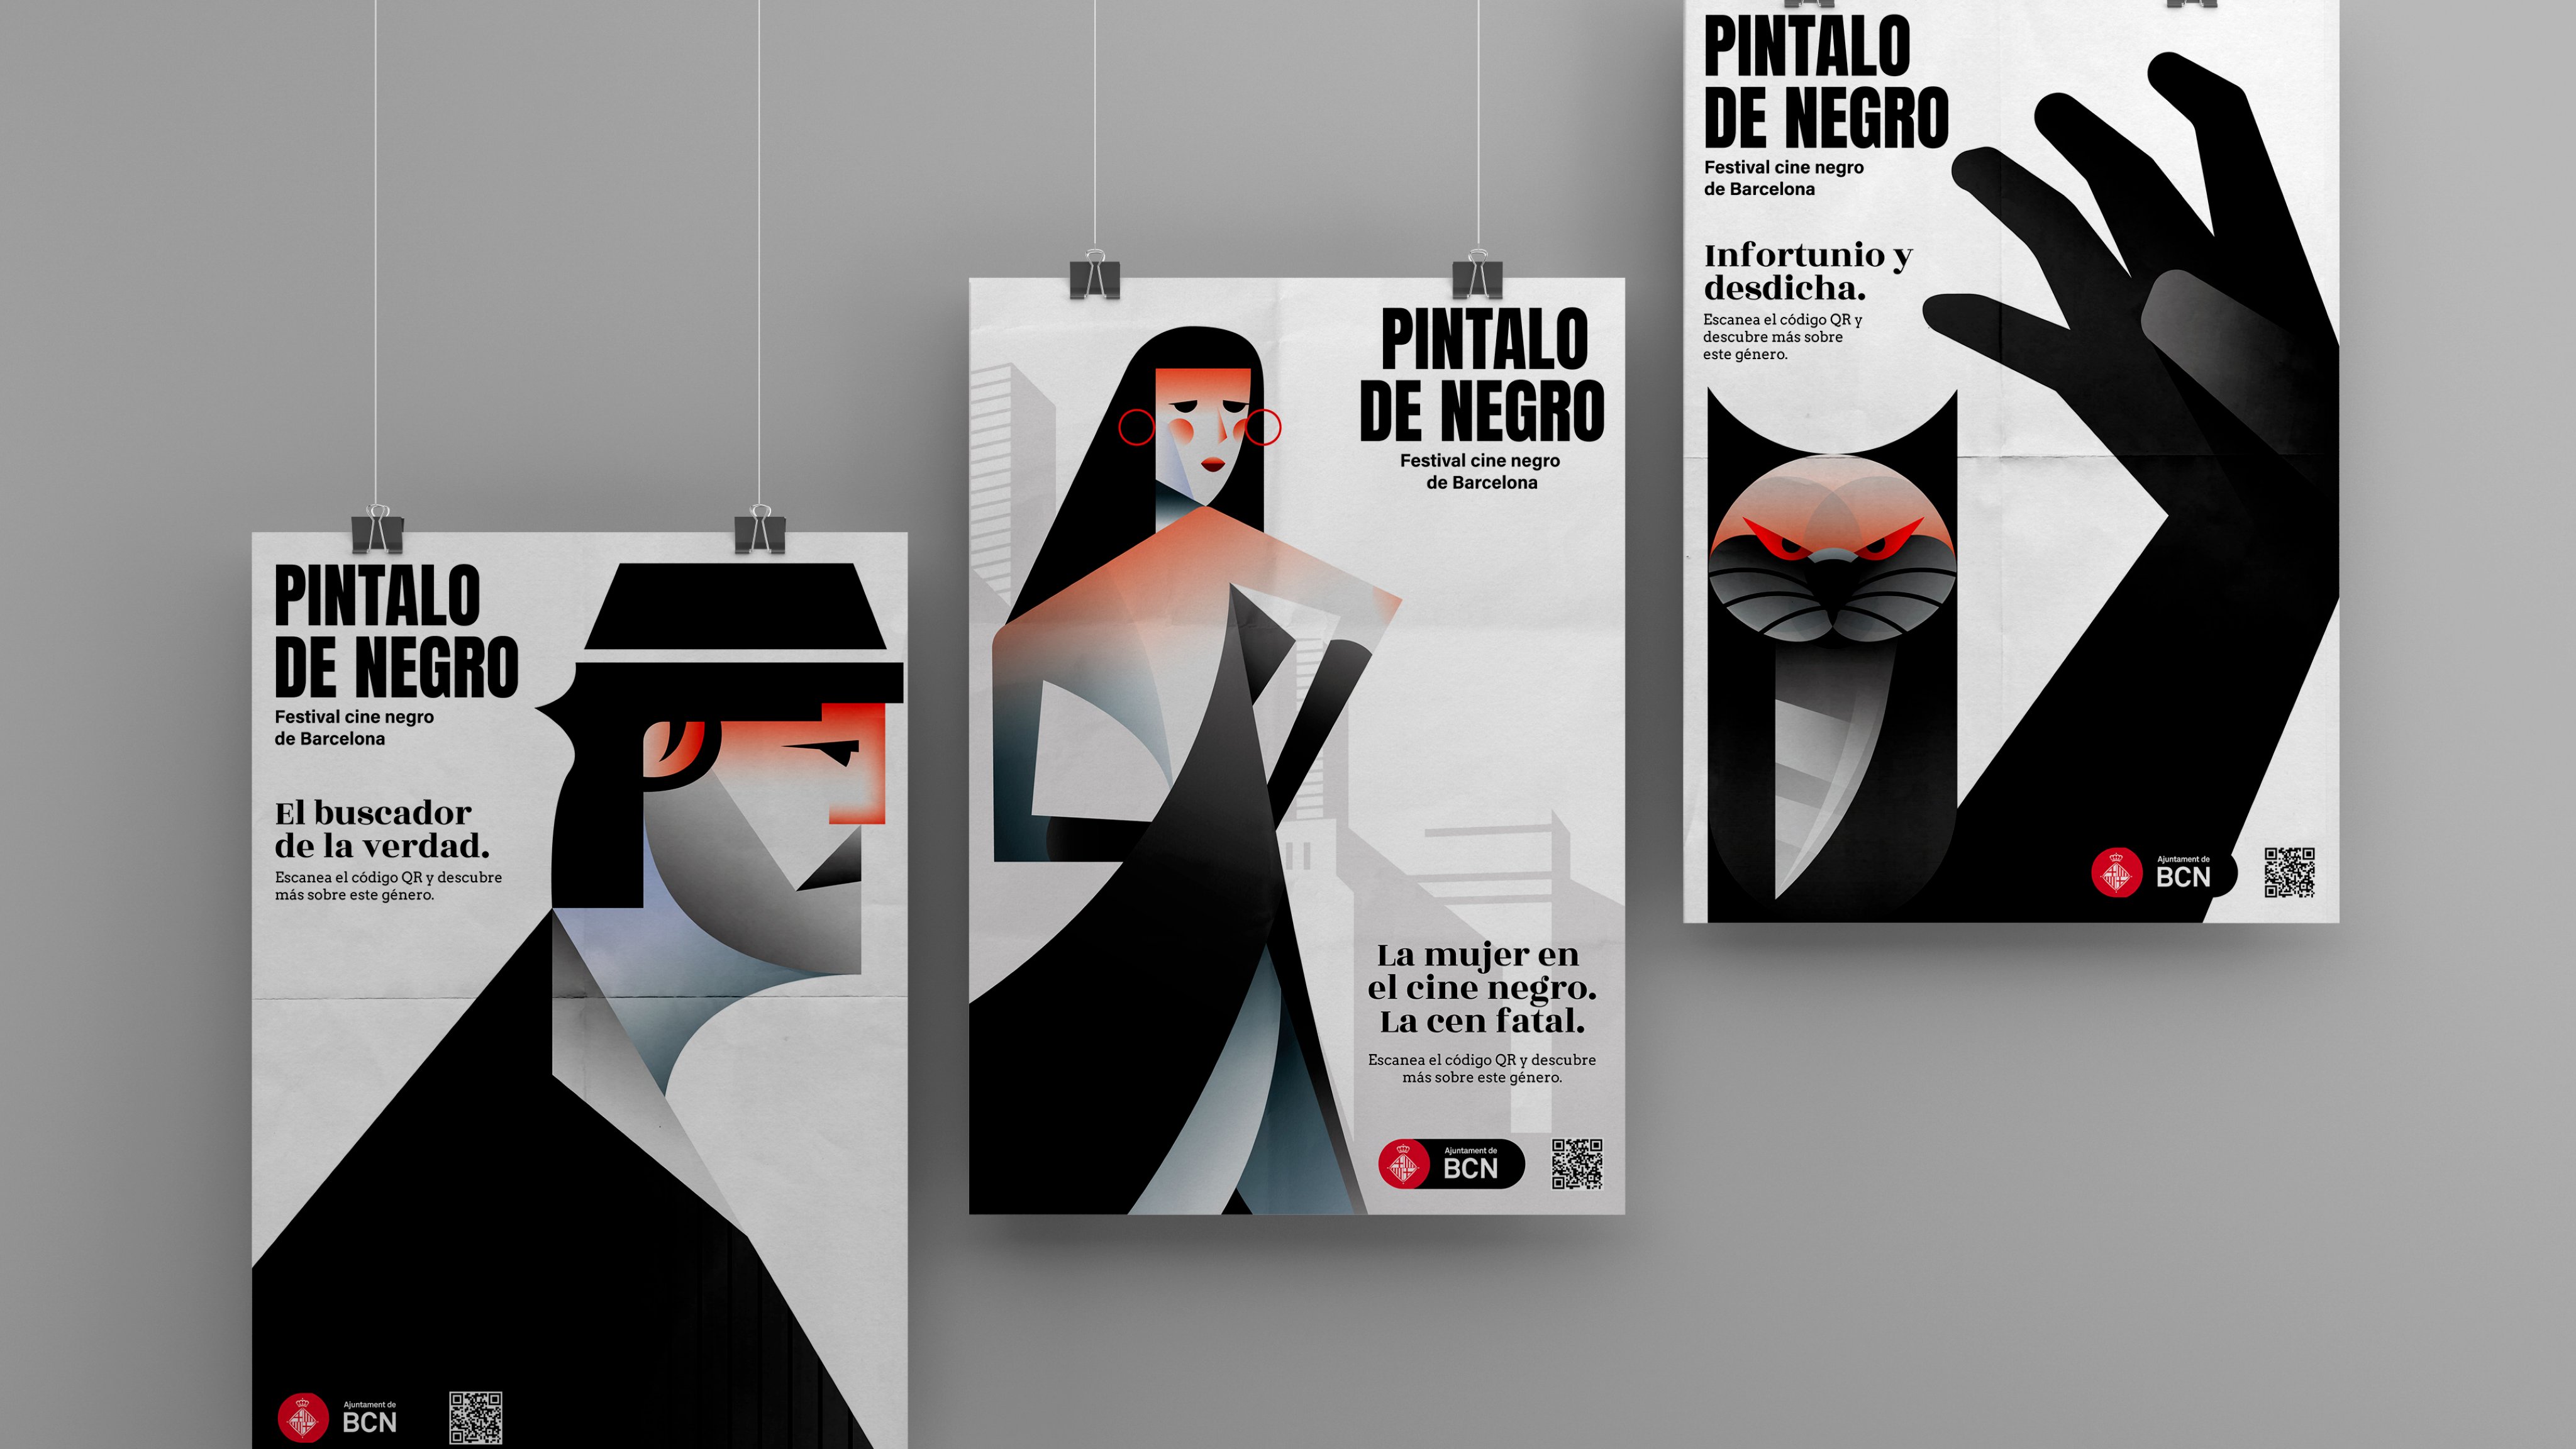 Final Project by Olivia Ortiz, a student of the Online Master’s Degree in Editorial and Advertising Illustration.